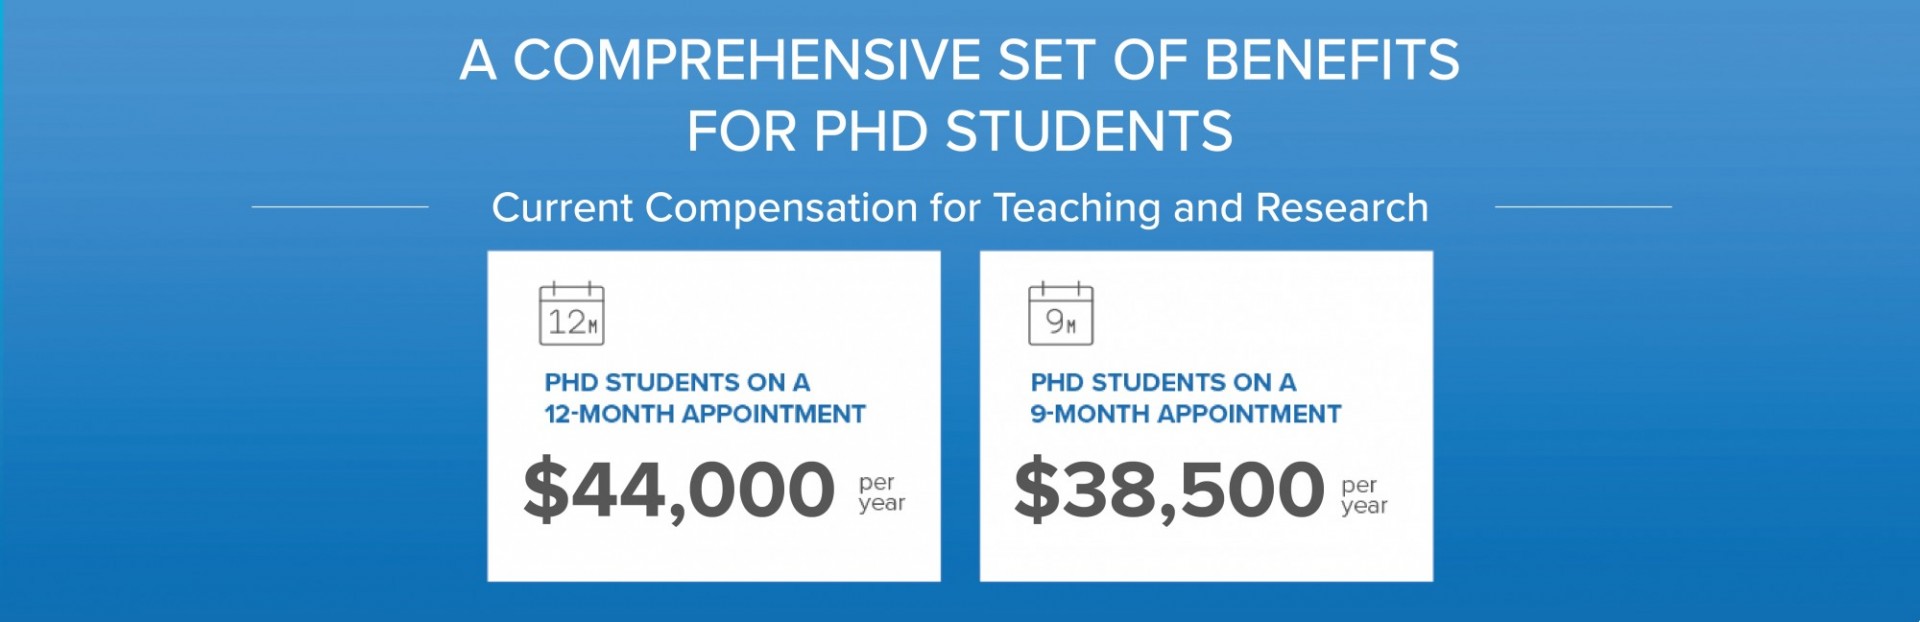 A comprehensive set of benefits for PhD students: PHD students on 12-month appointment, $44,000 per year; PHD students on 9-month appointment, $38,500 per year